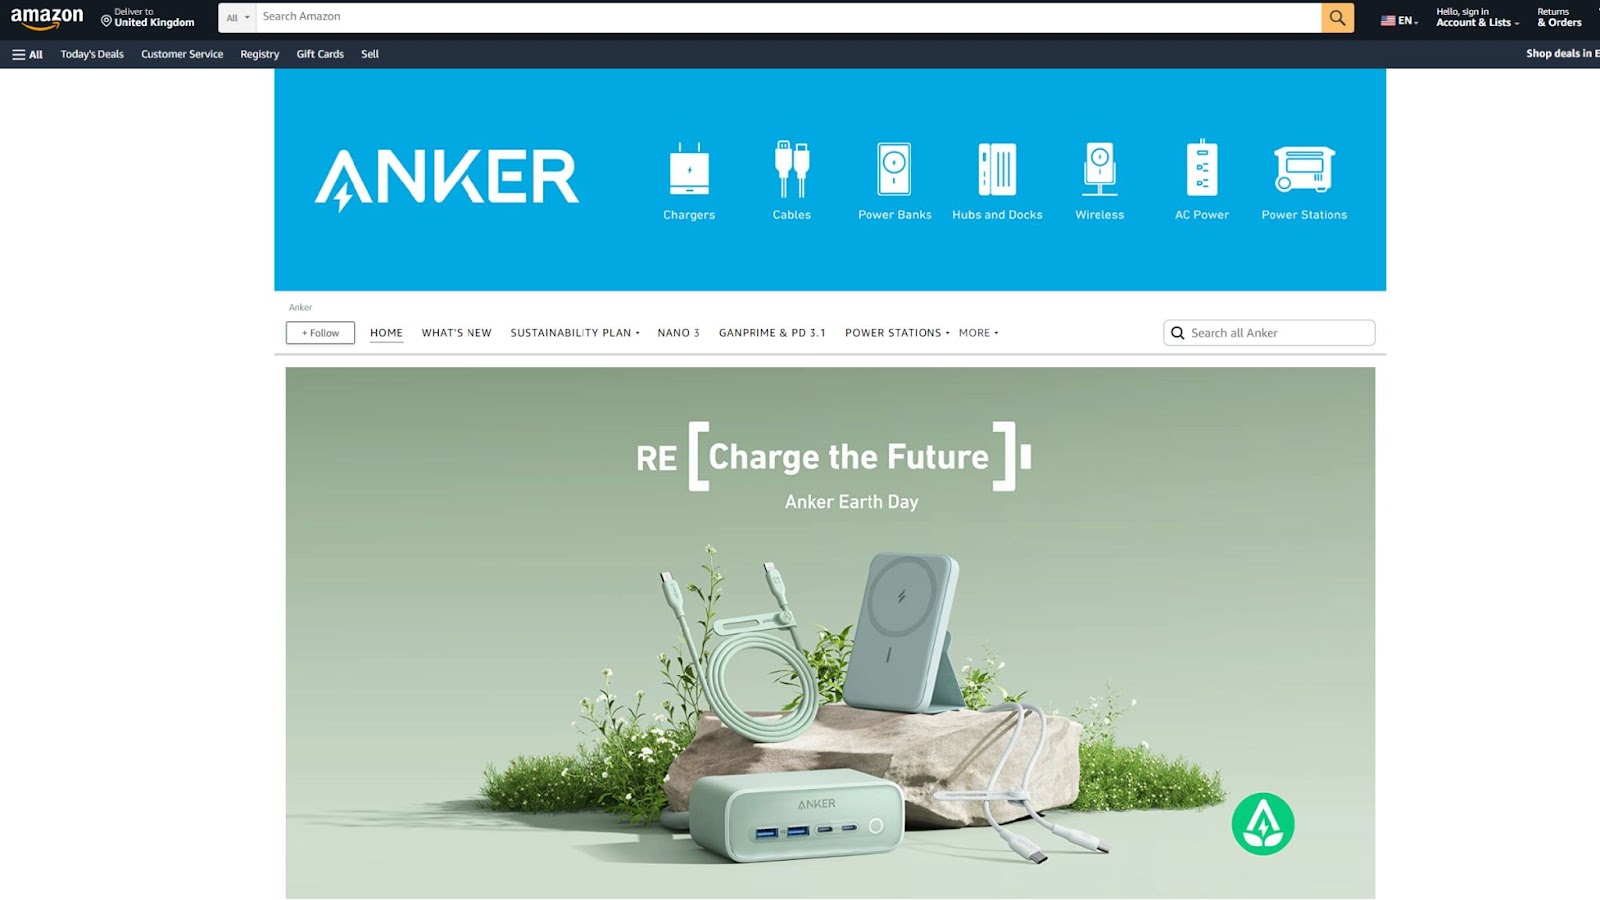 Here's A Screenshot Of Anker Amazon Store